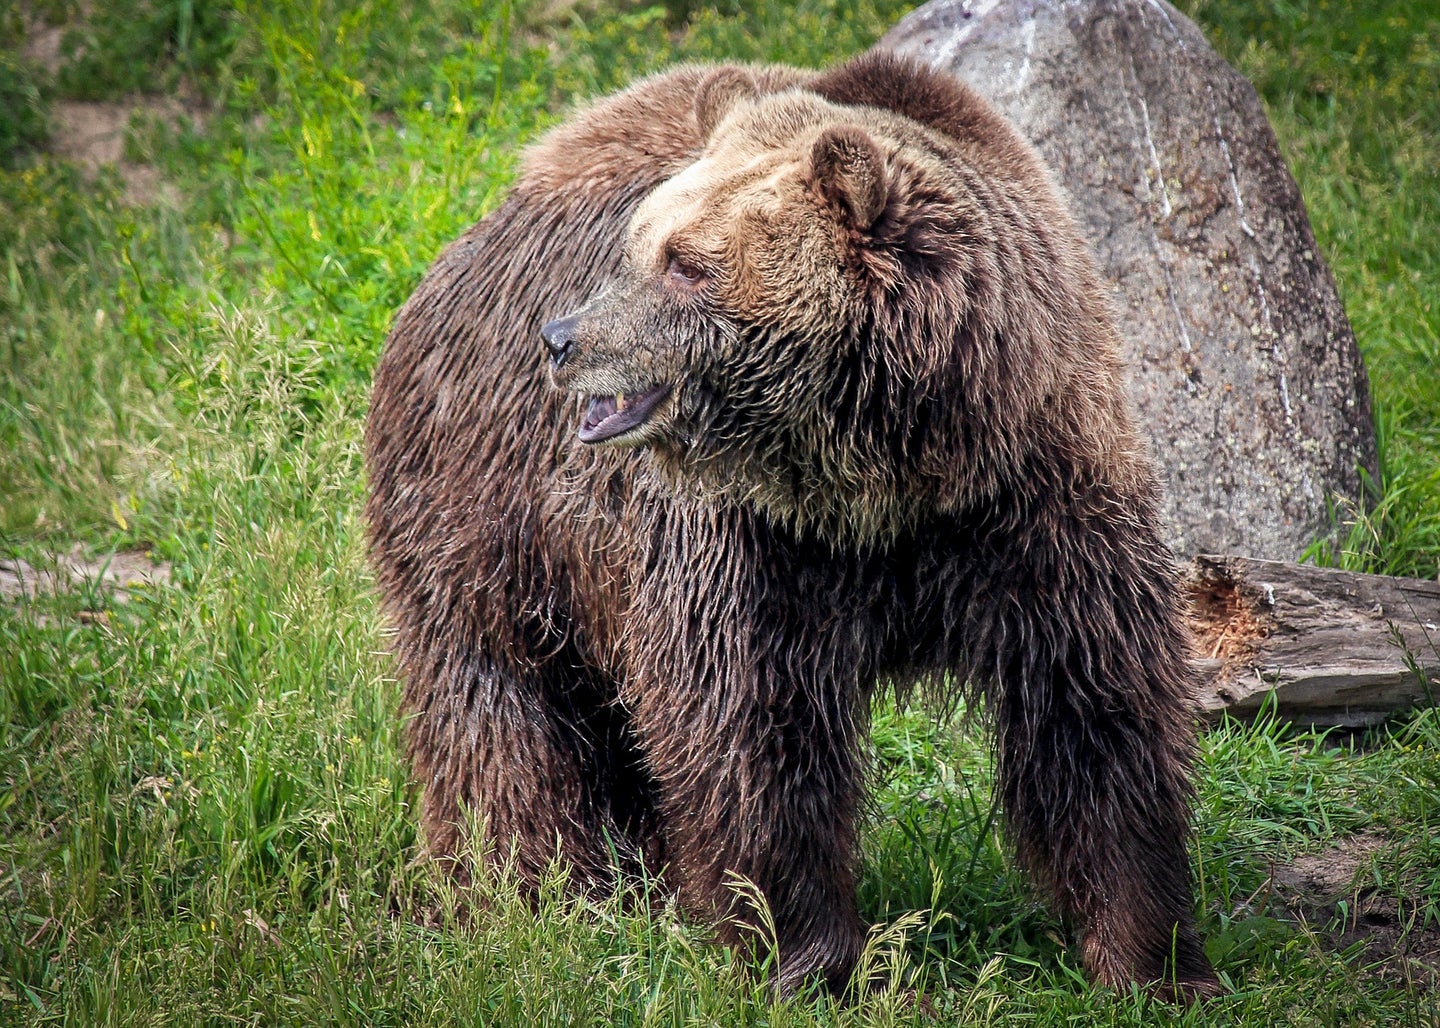 The search is on for a grizzly that attacked and killed a camper in Montana.